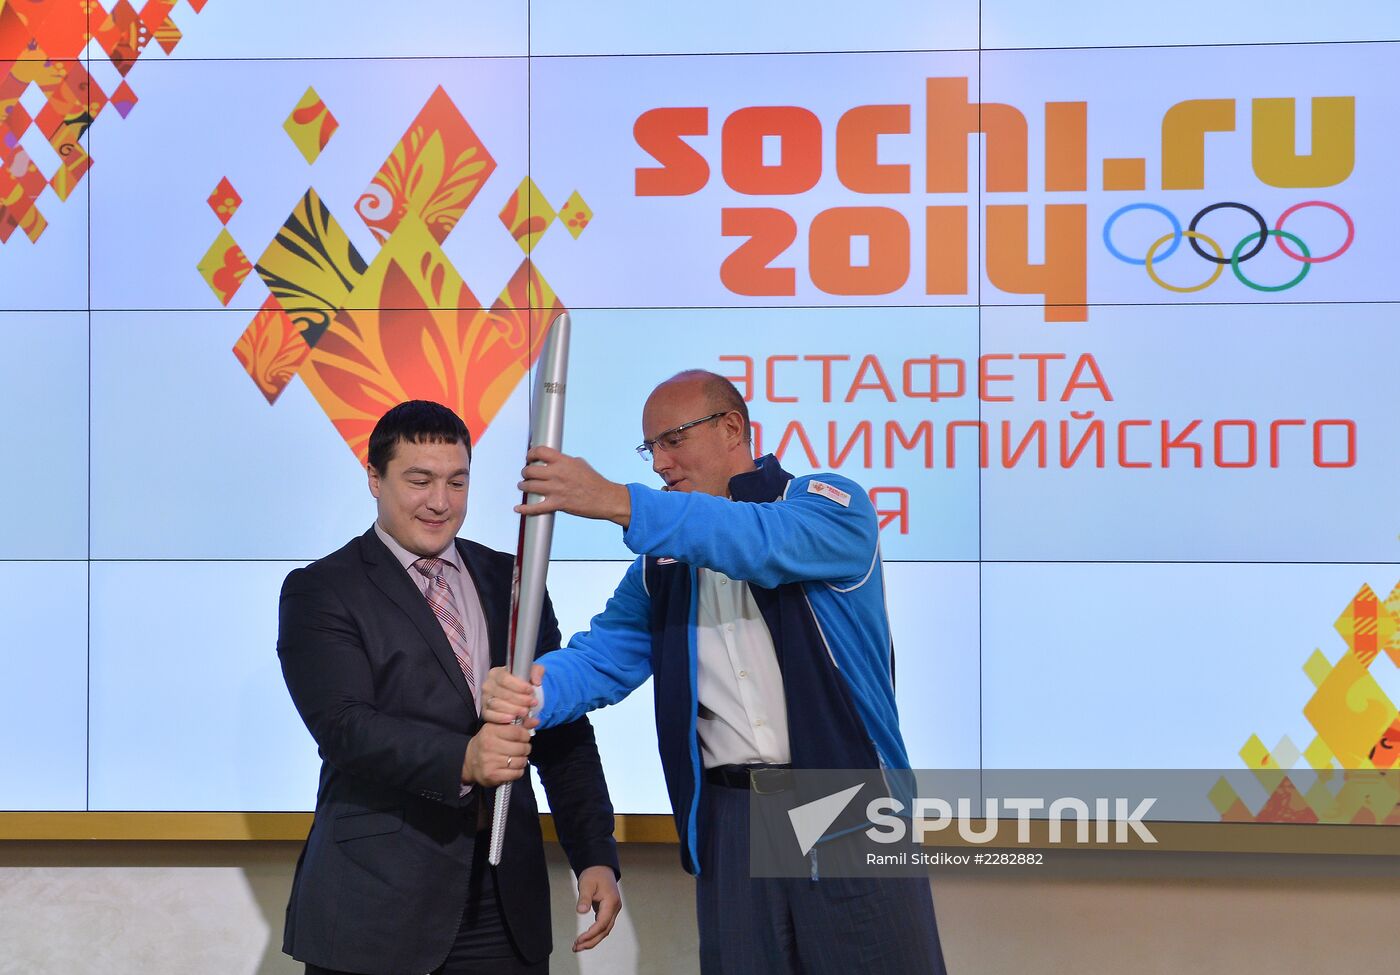 Special projects for Sochi 2014 Olympic torch relay presented